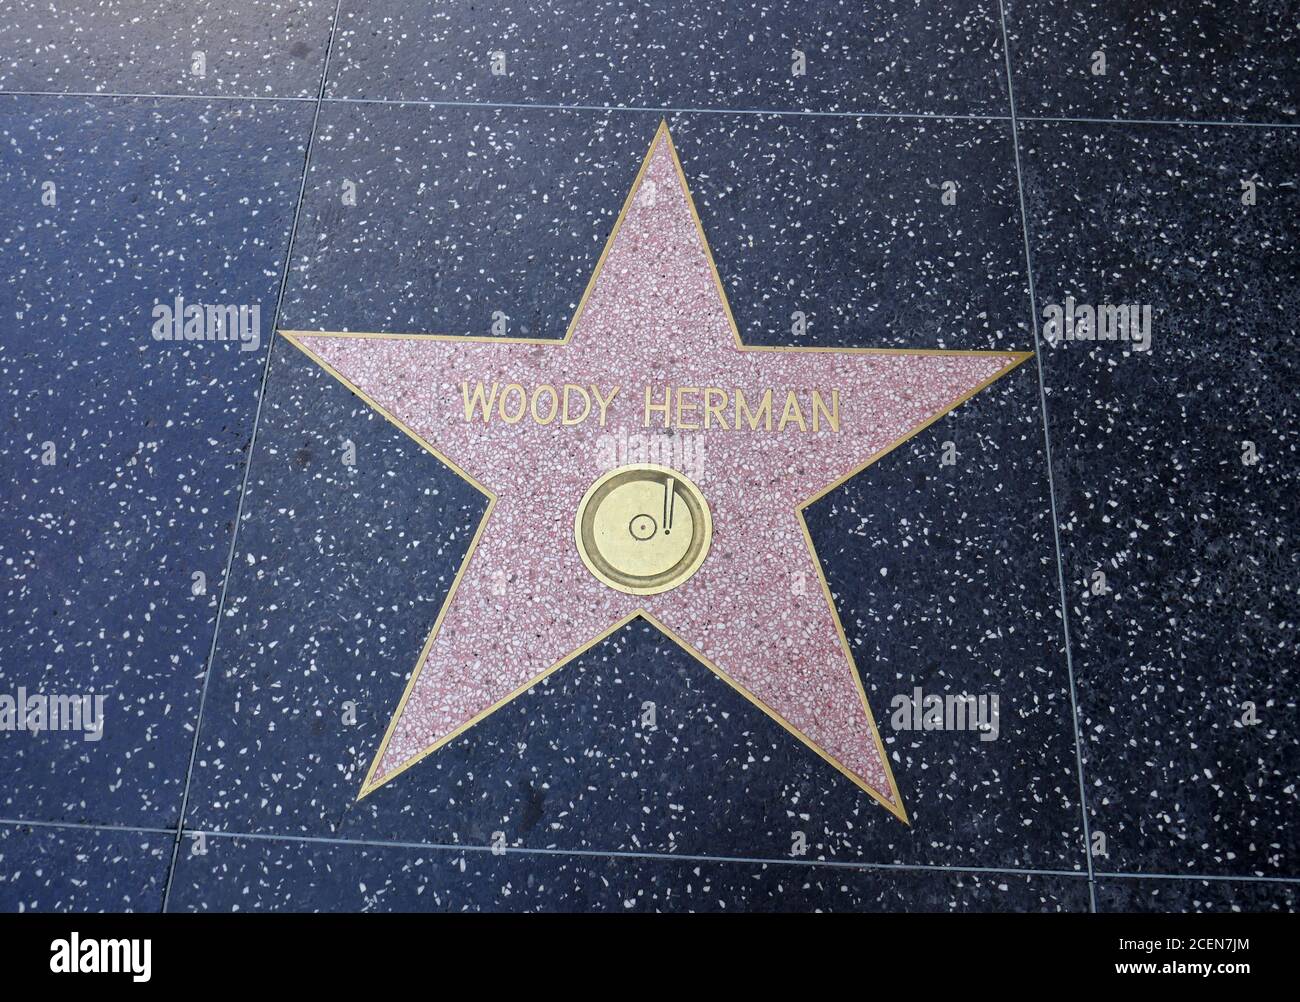 Hollywood, California, USA 1st September 2020 A general view of atmosphere of musician Woody Herman's Star on Hollywood Walk of Fame on September 1, 2020 in Hollywood, California, USA. Photo by Barry King/Alamy Stock Photo Stock Photo